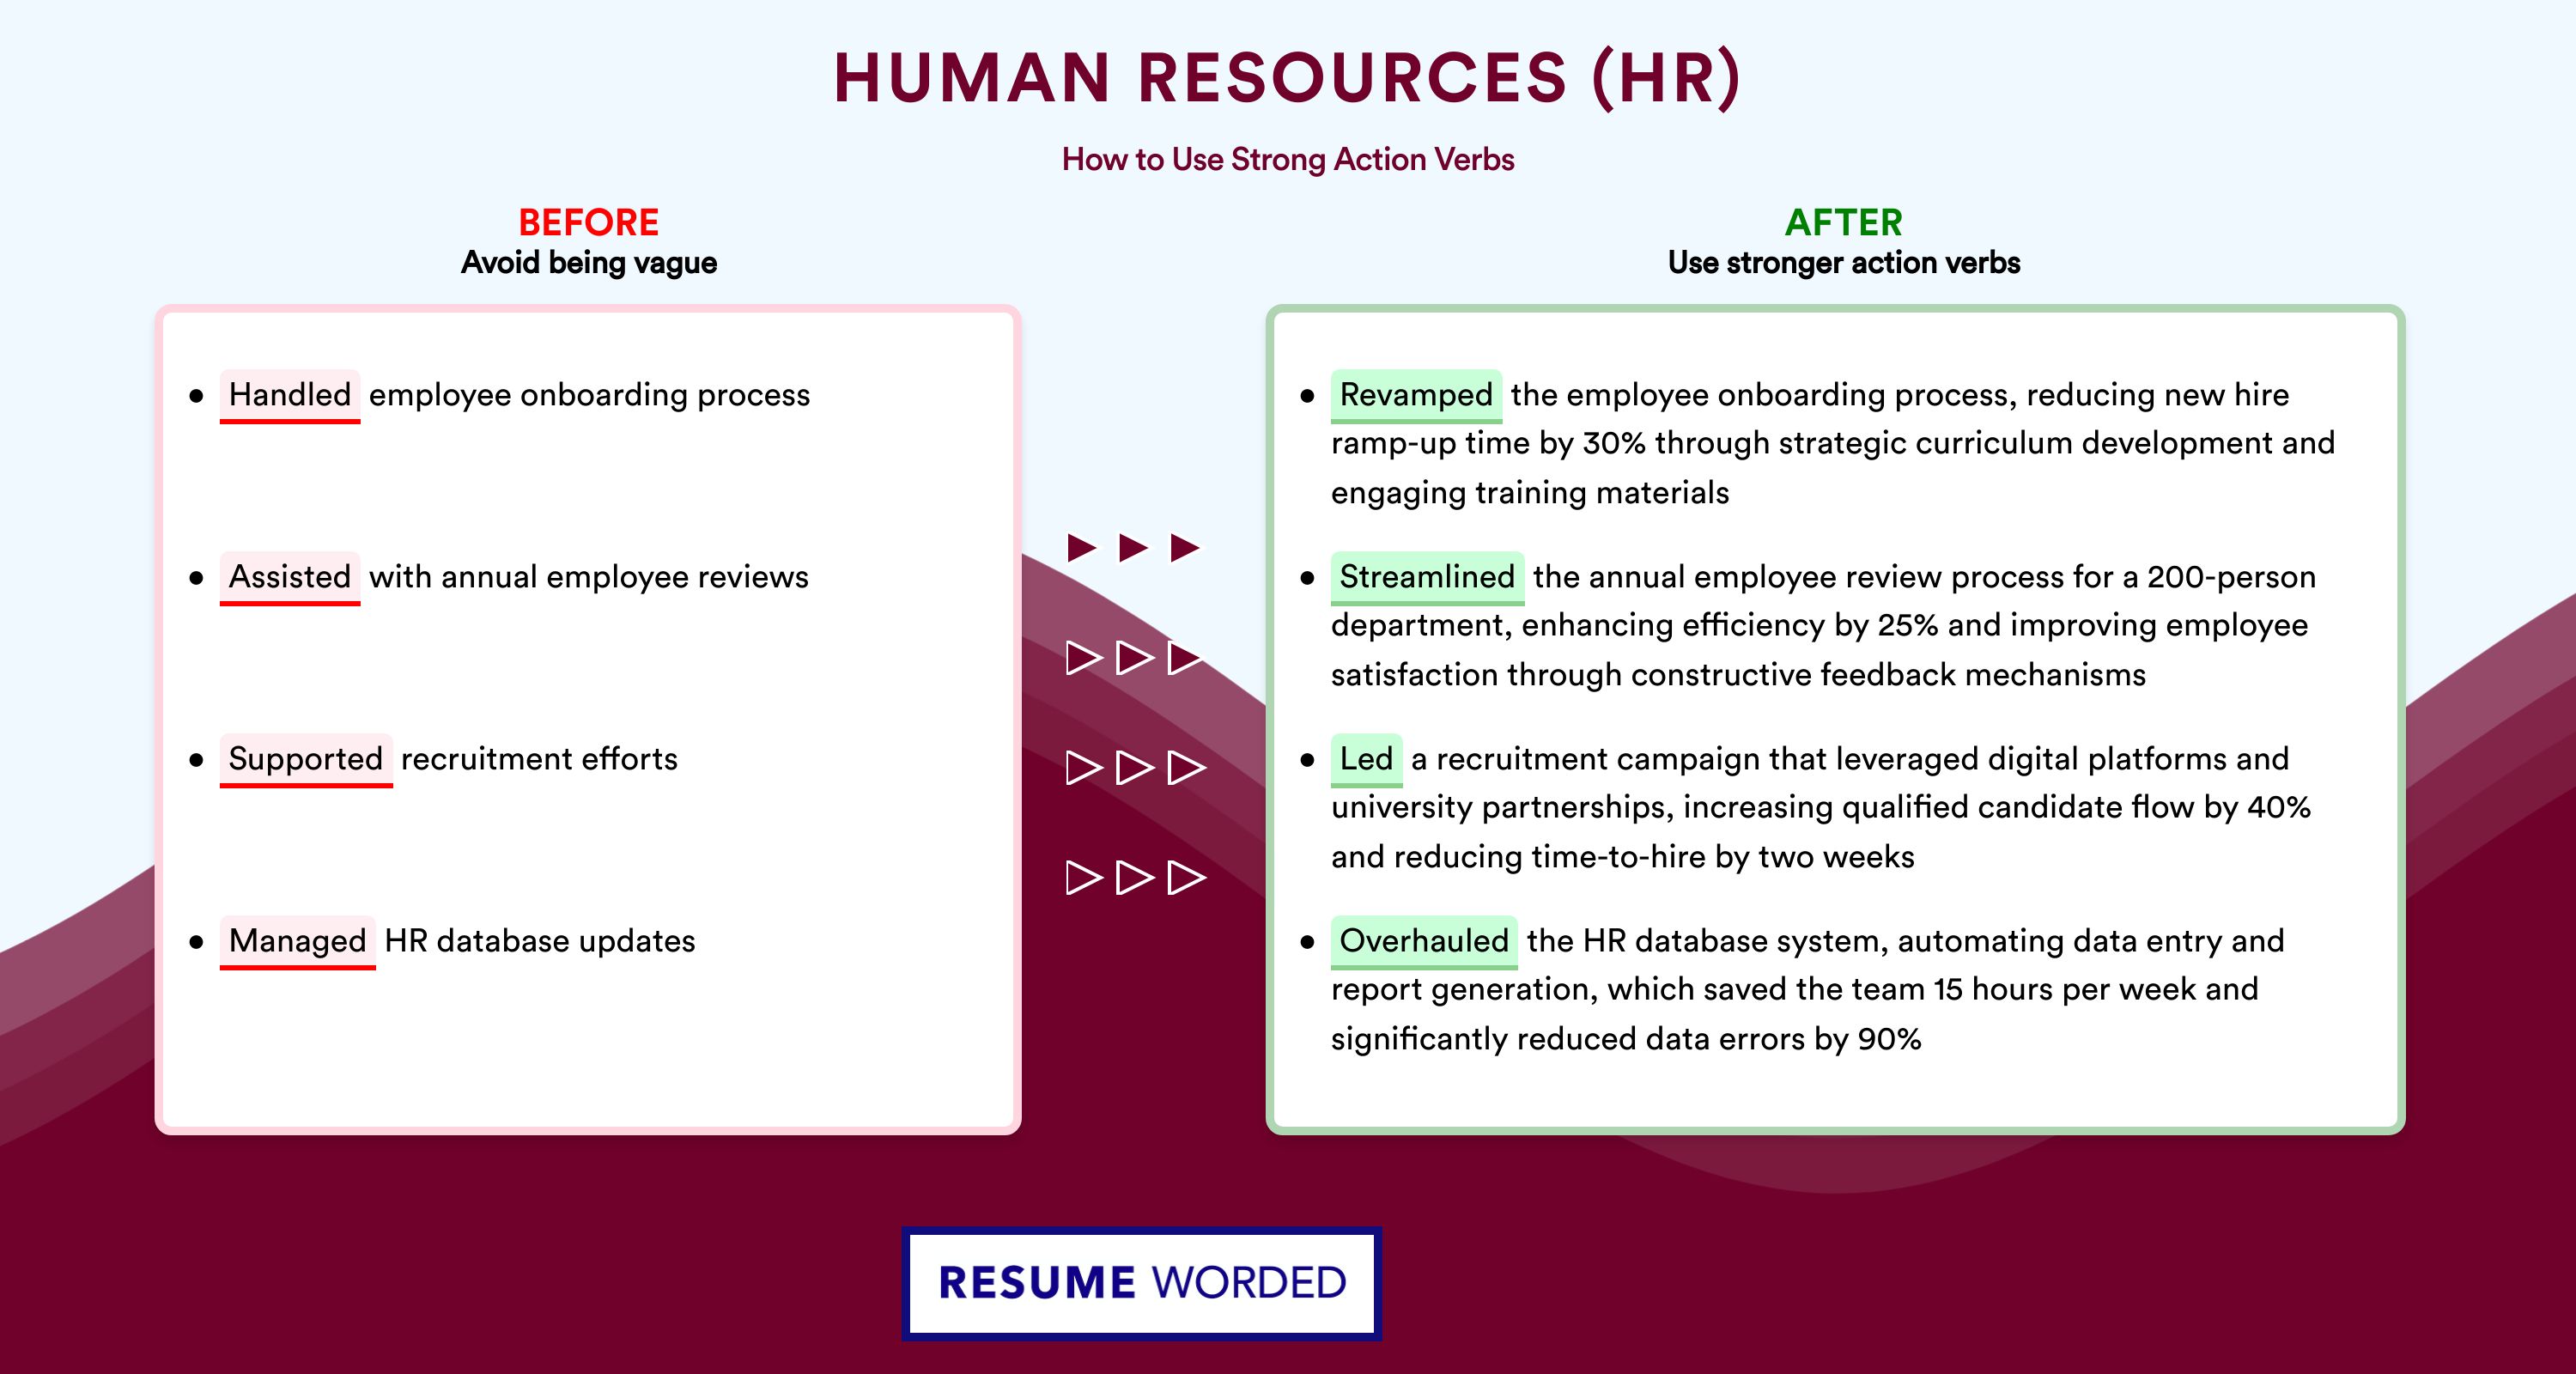 Action Verbs for Human Resources (HR)